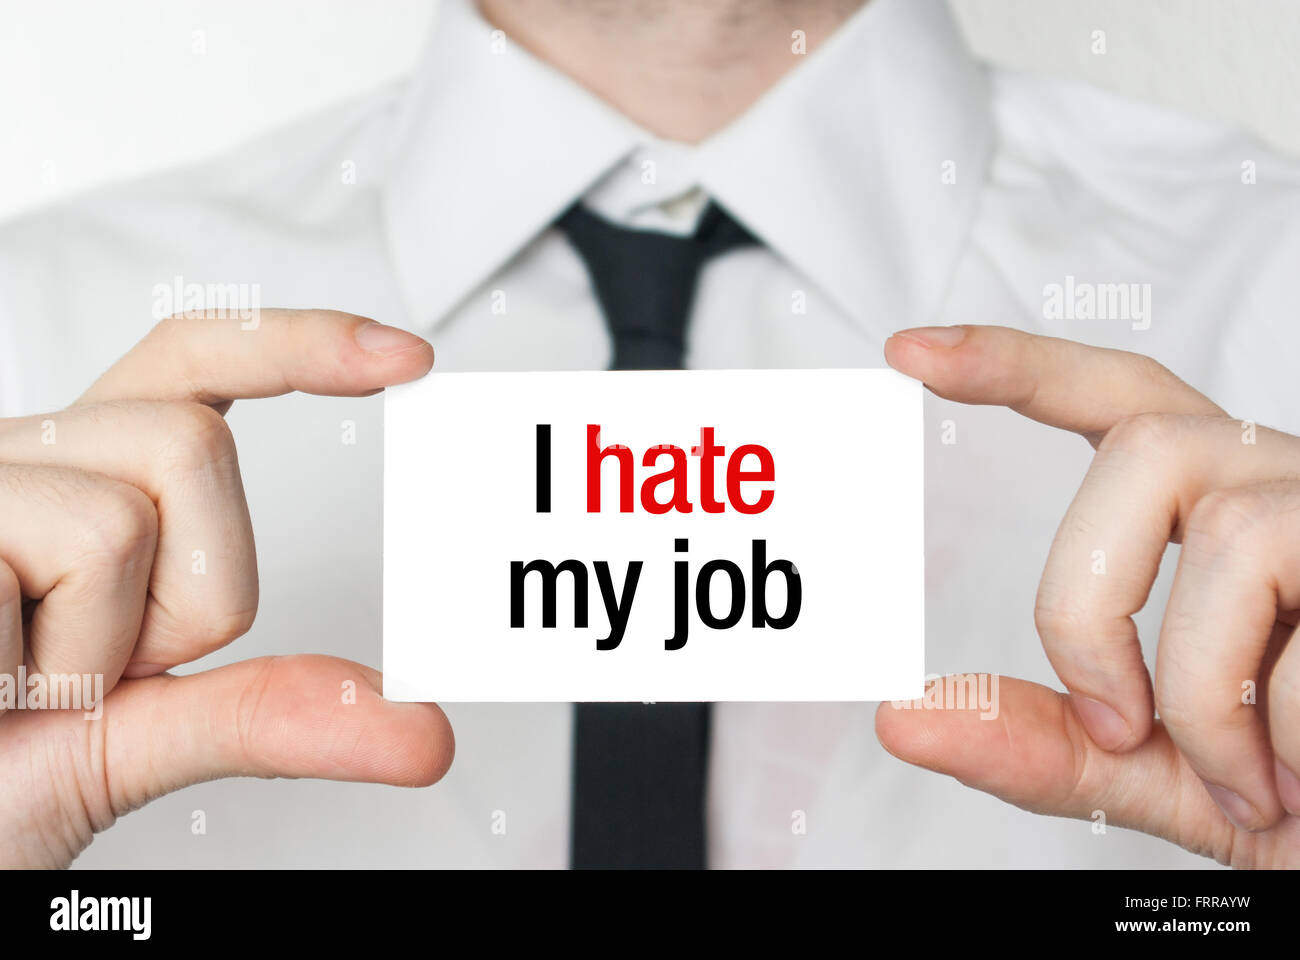 Businessman or employee holding showing card with text I hate my job Stock Photo